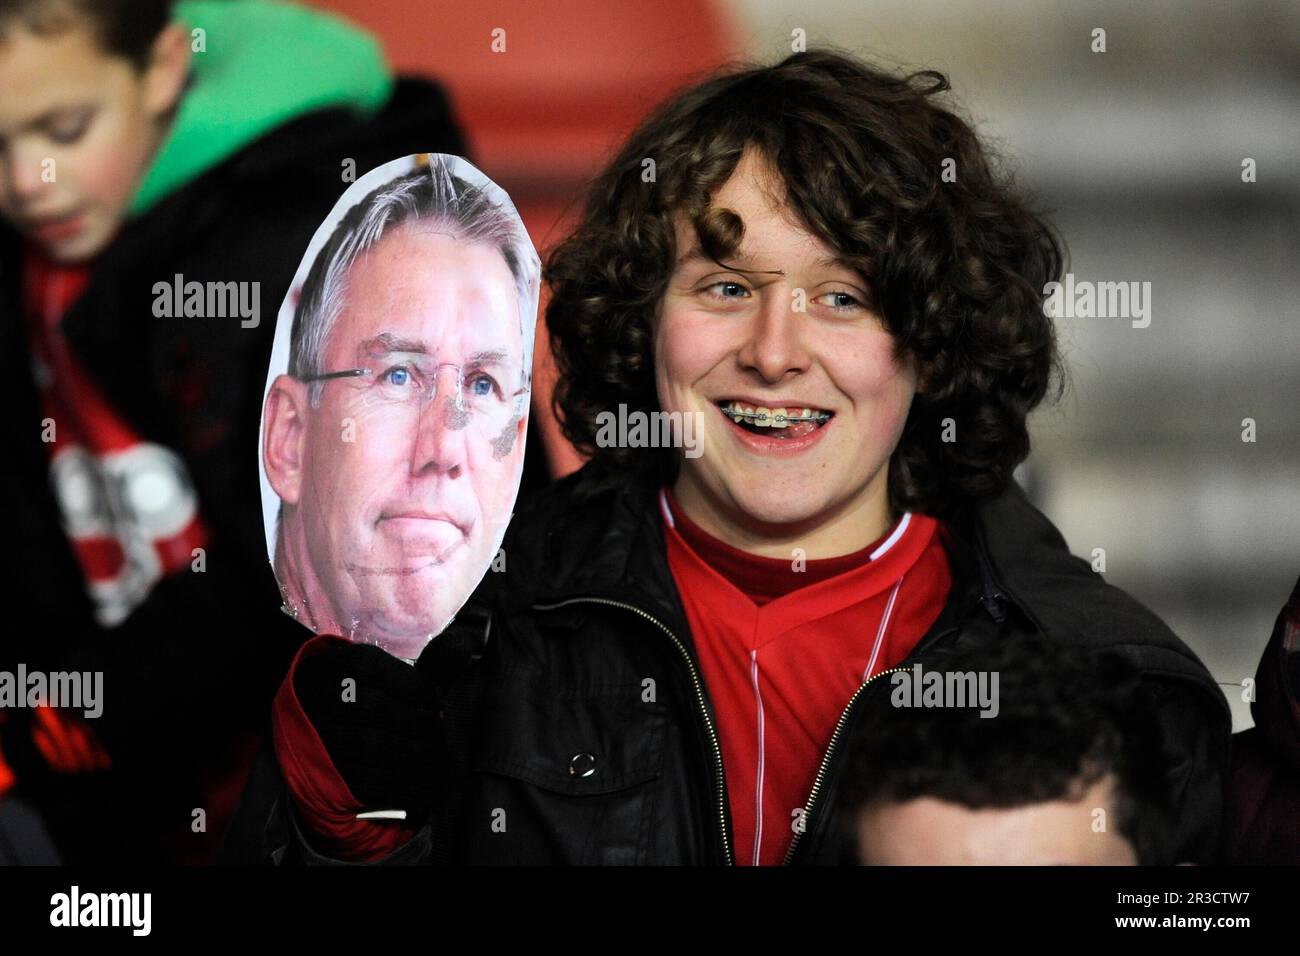 A young Southampton fan with a Nigel Adkins facemask during the Barclays Premier League match between Southampton and Everton at St Mary's on Monday 2 Stock Photo